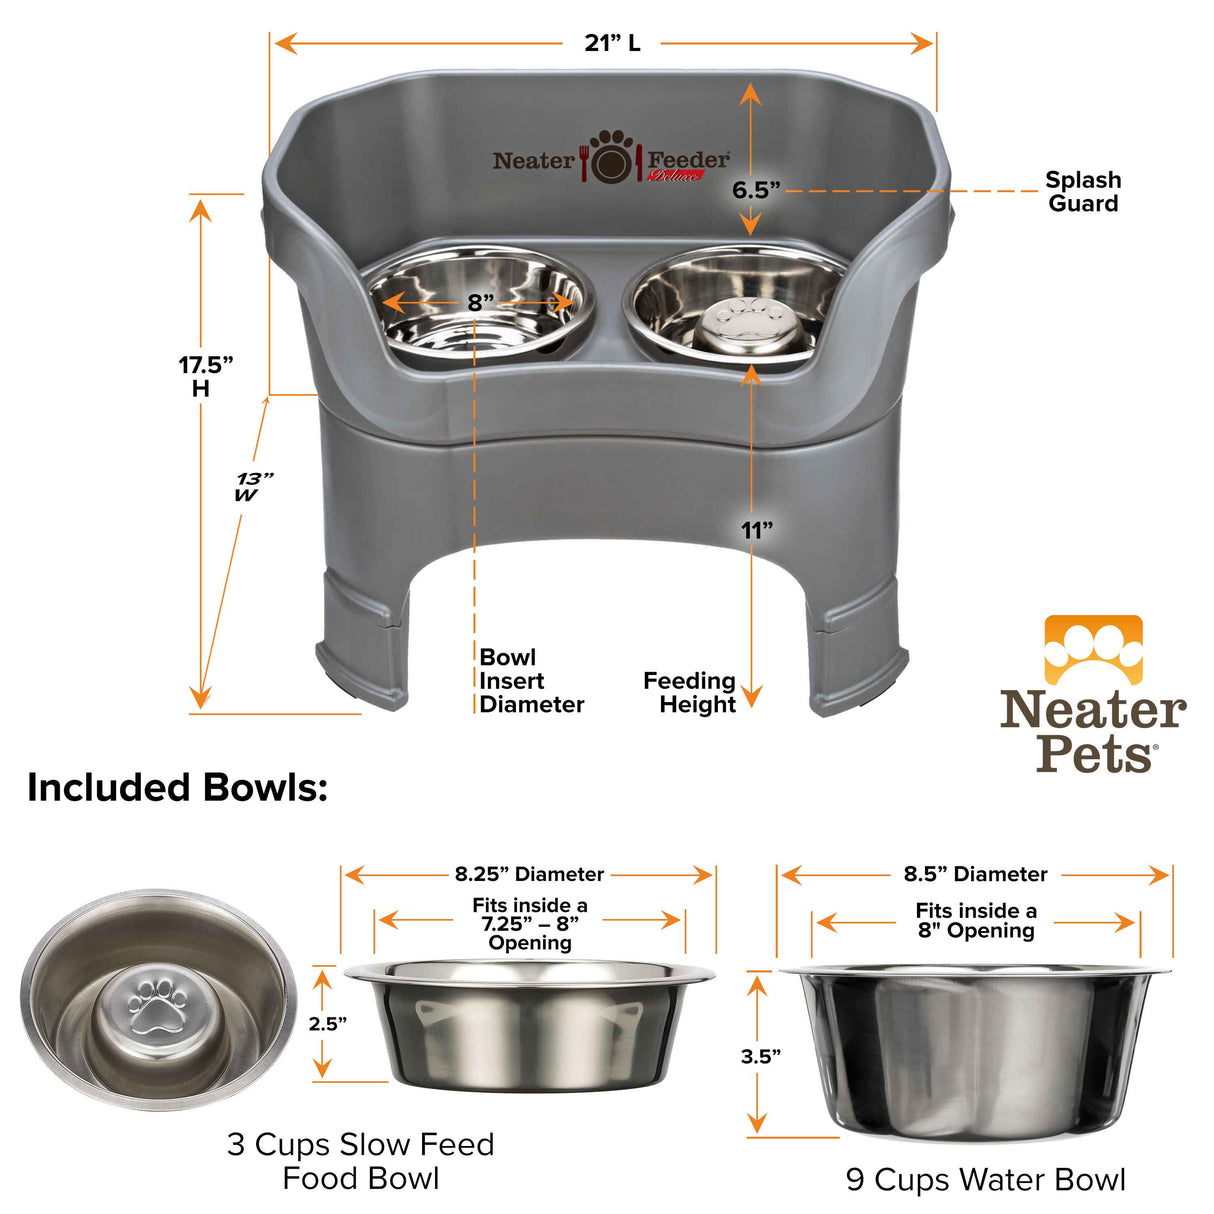 dimensions of gunmetal gray large DELUXE Neater Feeder with Stainless Steel Slow Feed Bowl with leg extensions